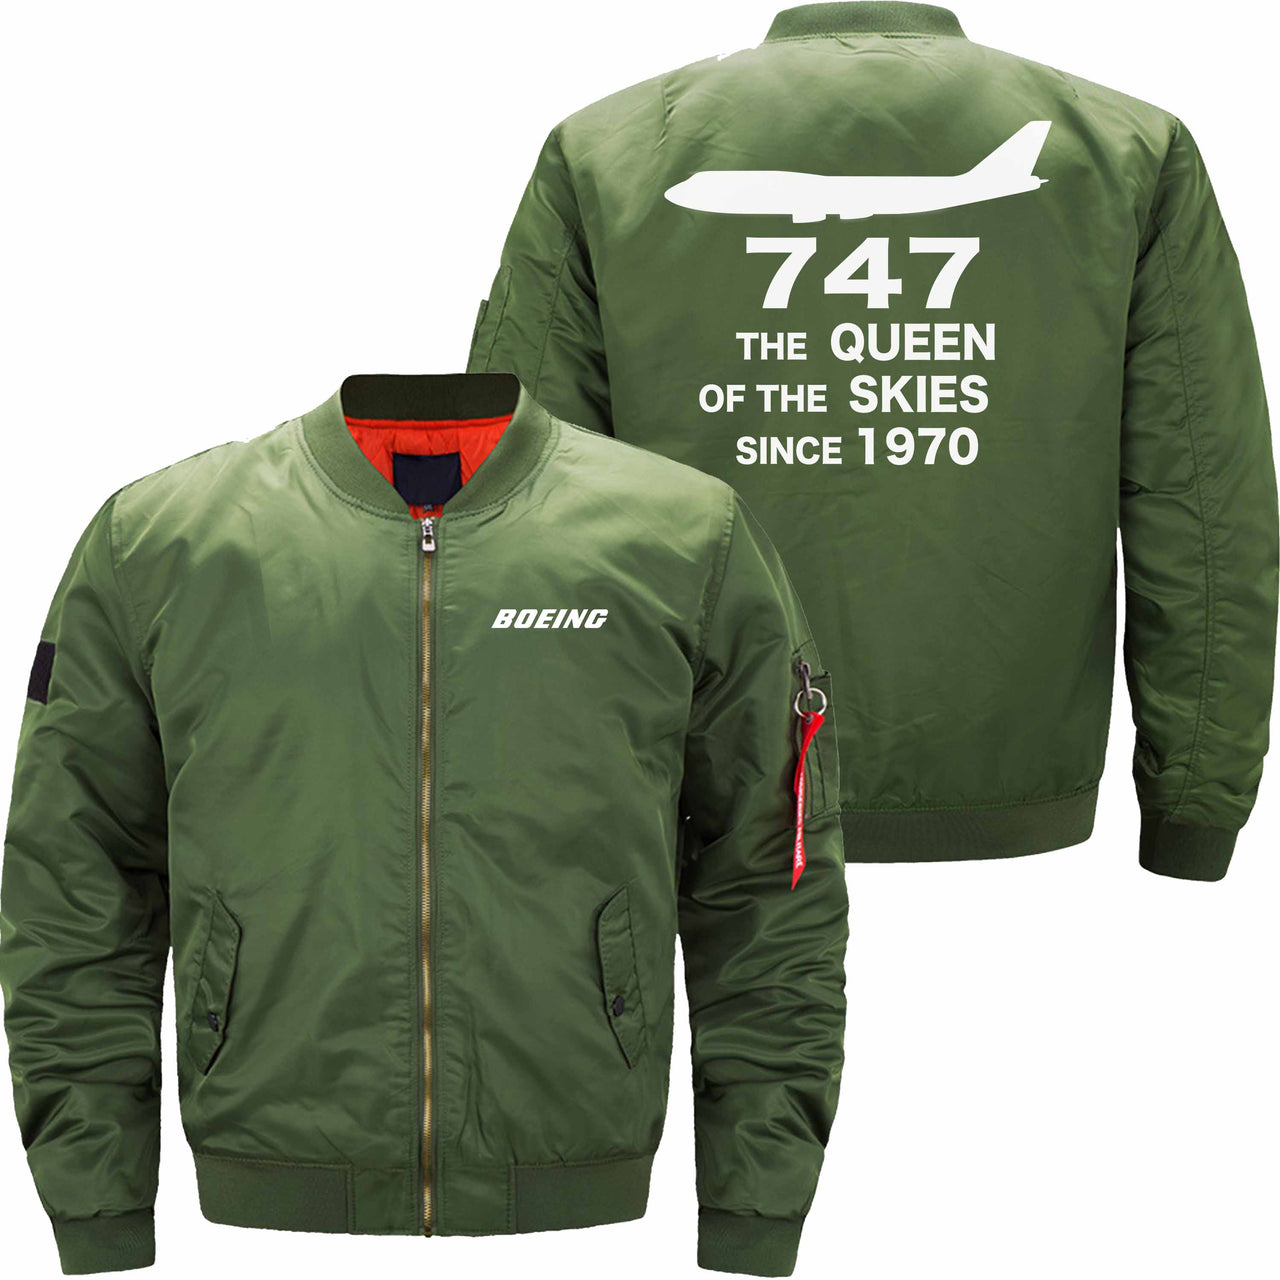 Boeing 747 THE QUEEN OF THE SKIES SINCE 1970 Ma-1 Bomber Jacket Flight Jacket Aviator Jacket THE AV8R